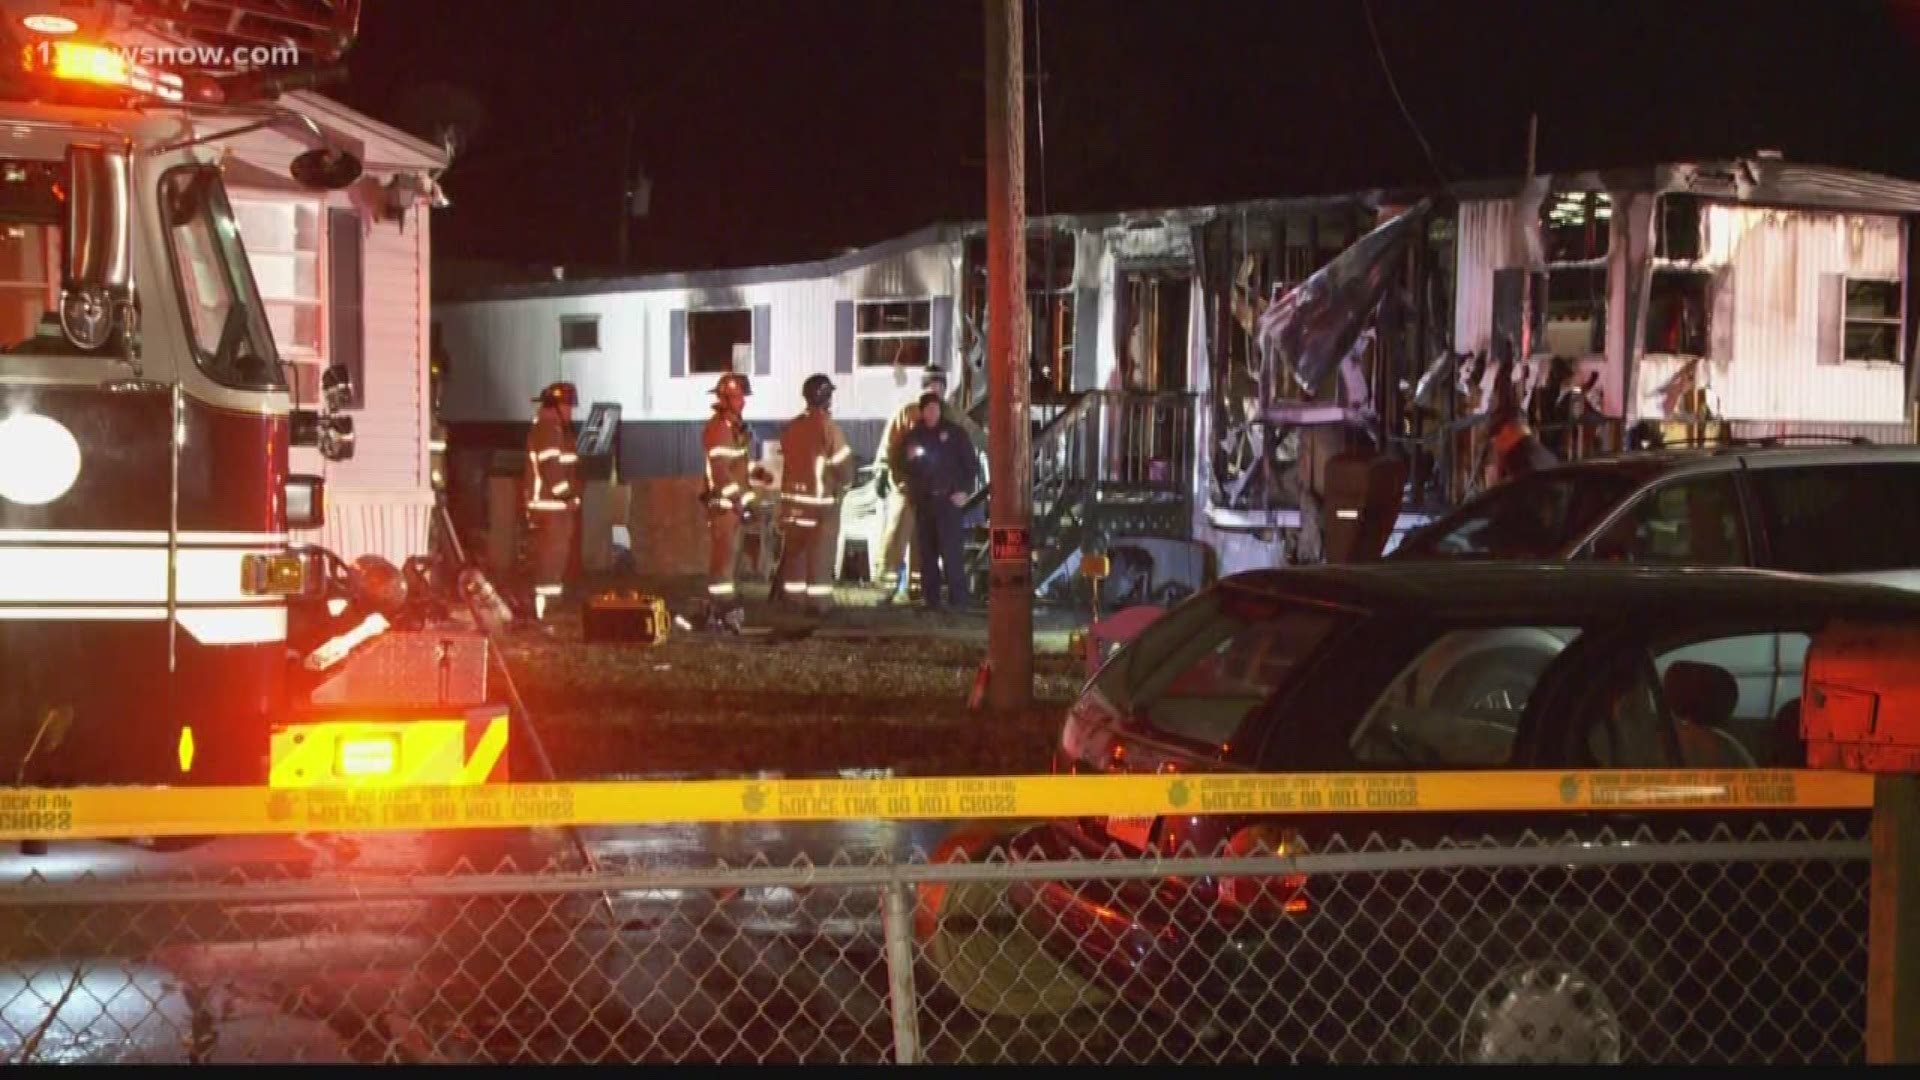 A mobile home was destroyed by fire, and three young children just made it out alive.